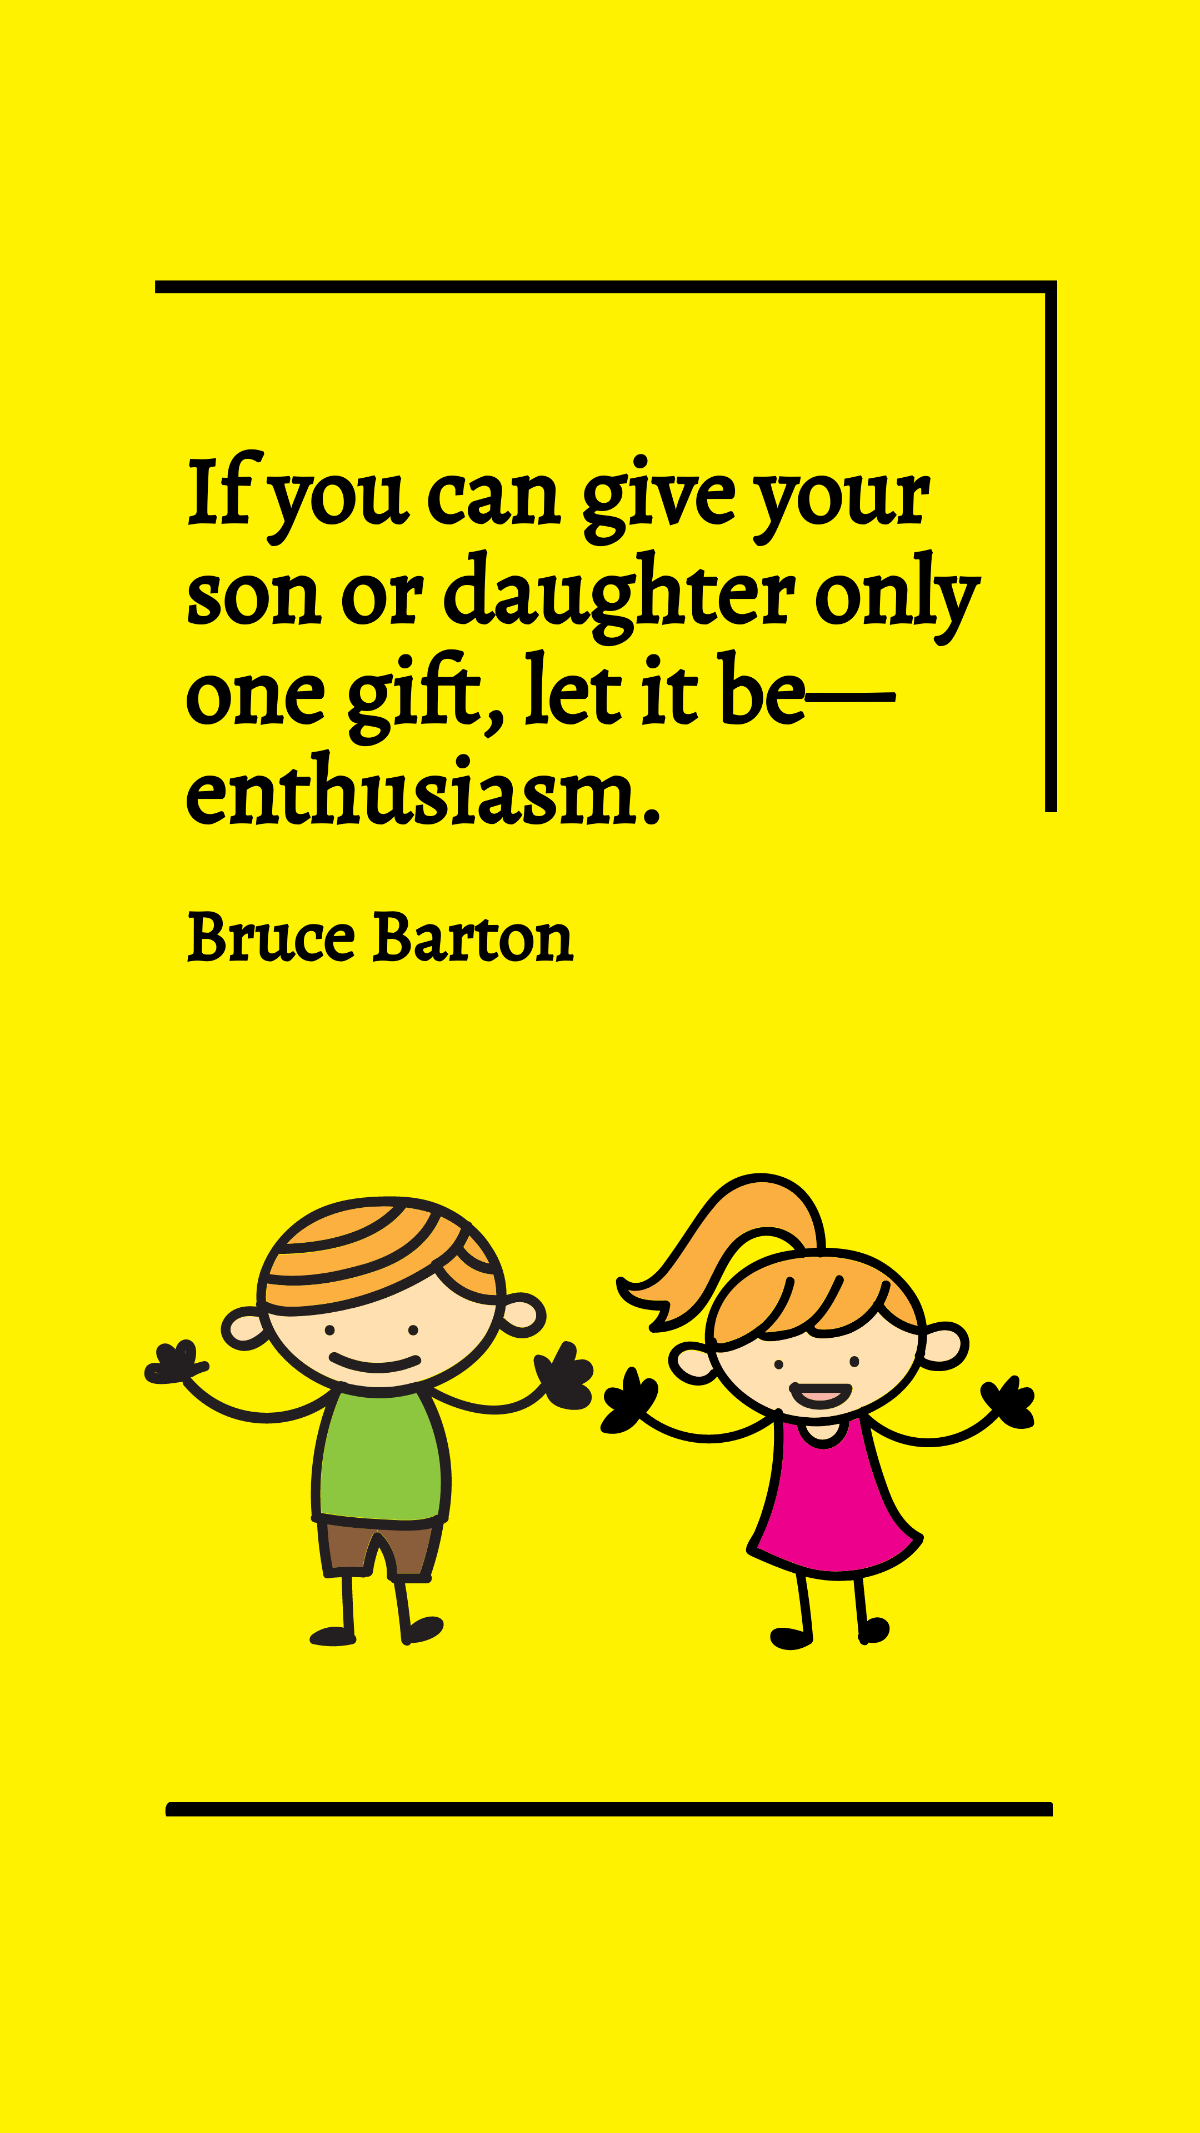 Bruce Barton - If you can give your son or daughter only one gift, let it be - enthusiasm. Template